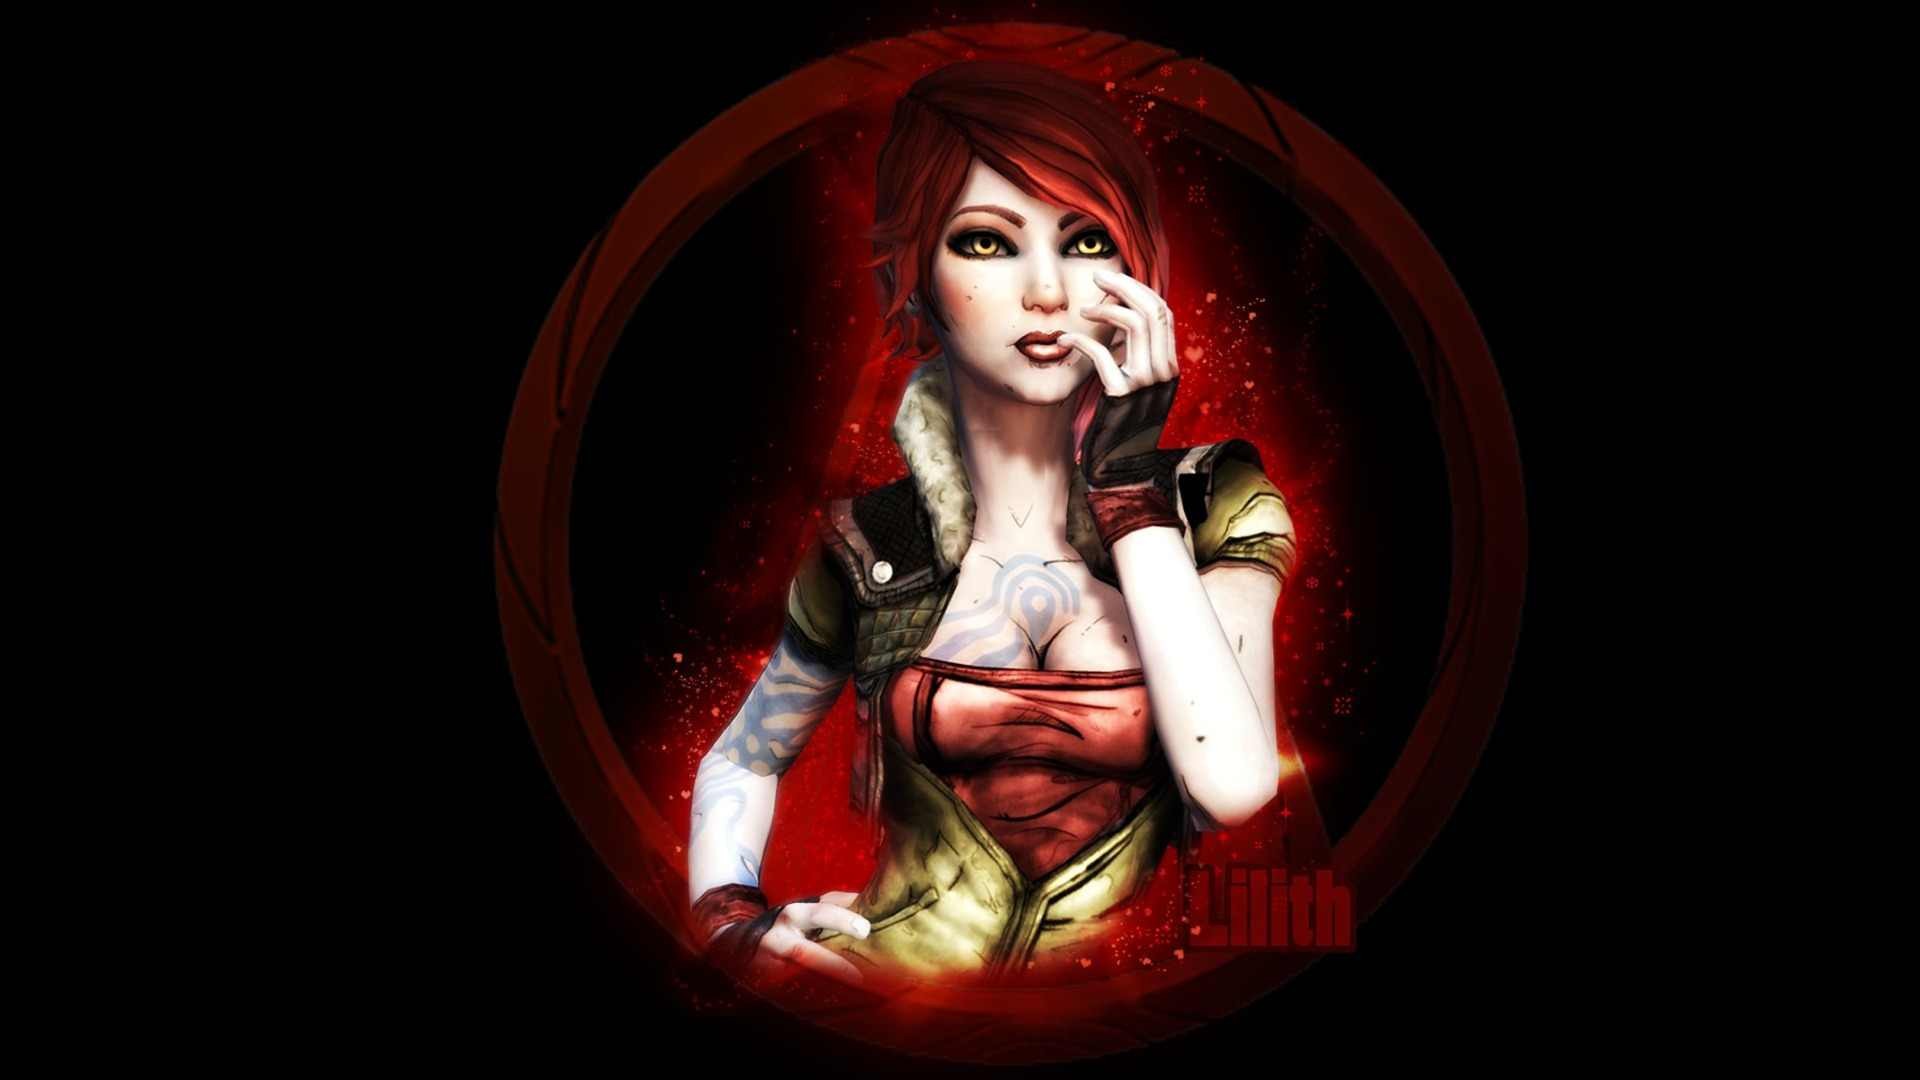 General 1920x1080 Borderlands 2 vault hunters video games Lilith (Borderlands) Gearbox Software video game girls science fiction women PC gaming redhead women yellow eyes boobs cleavage red lipstick video game art simple background black background